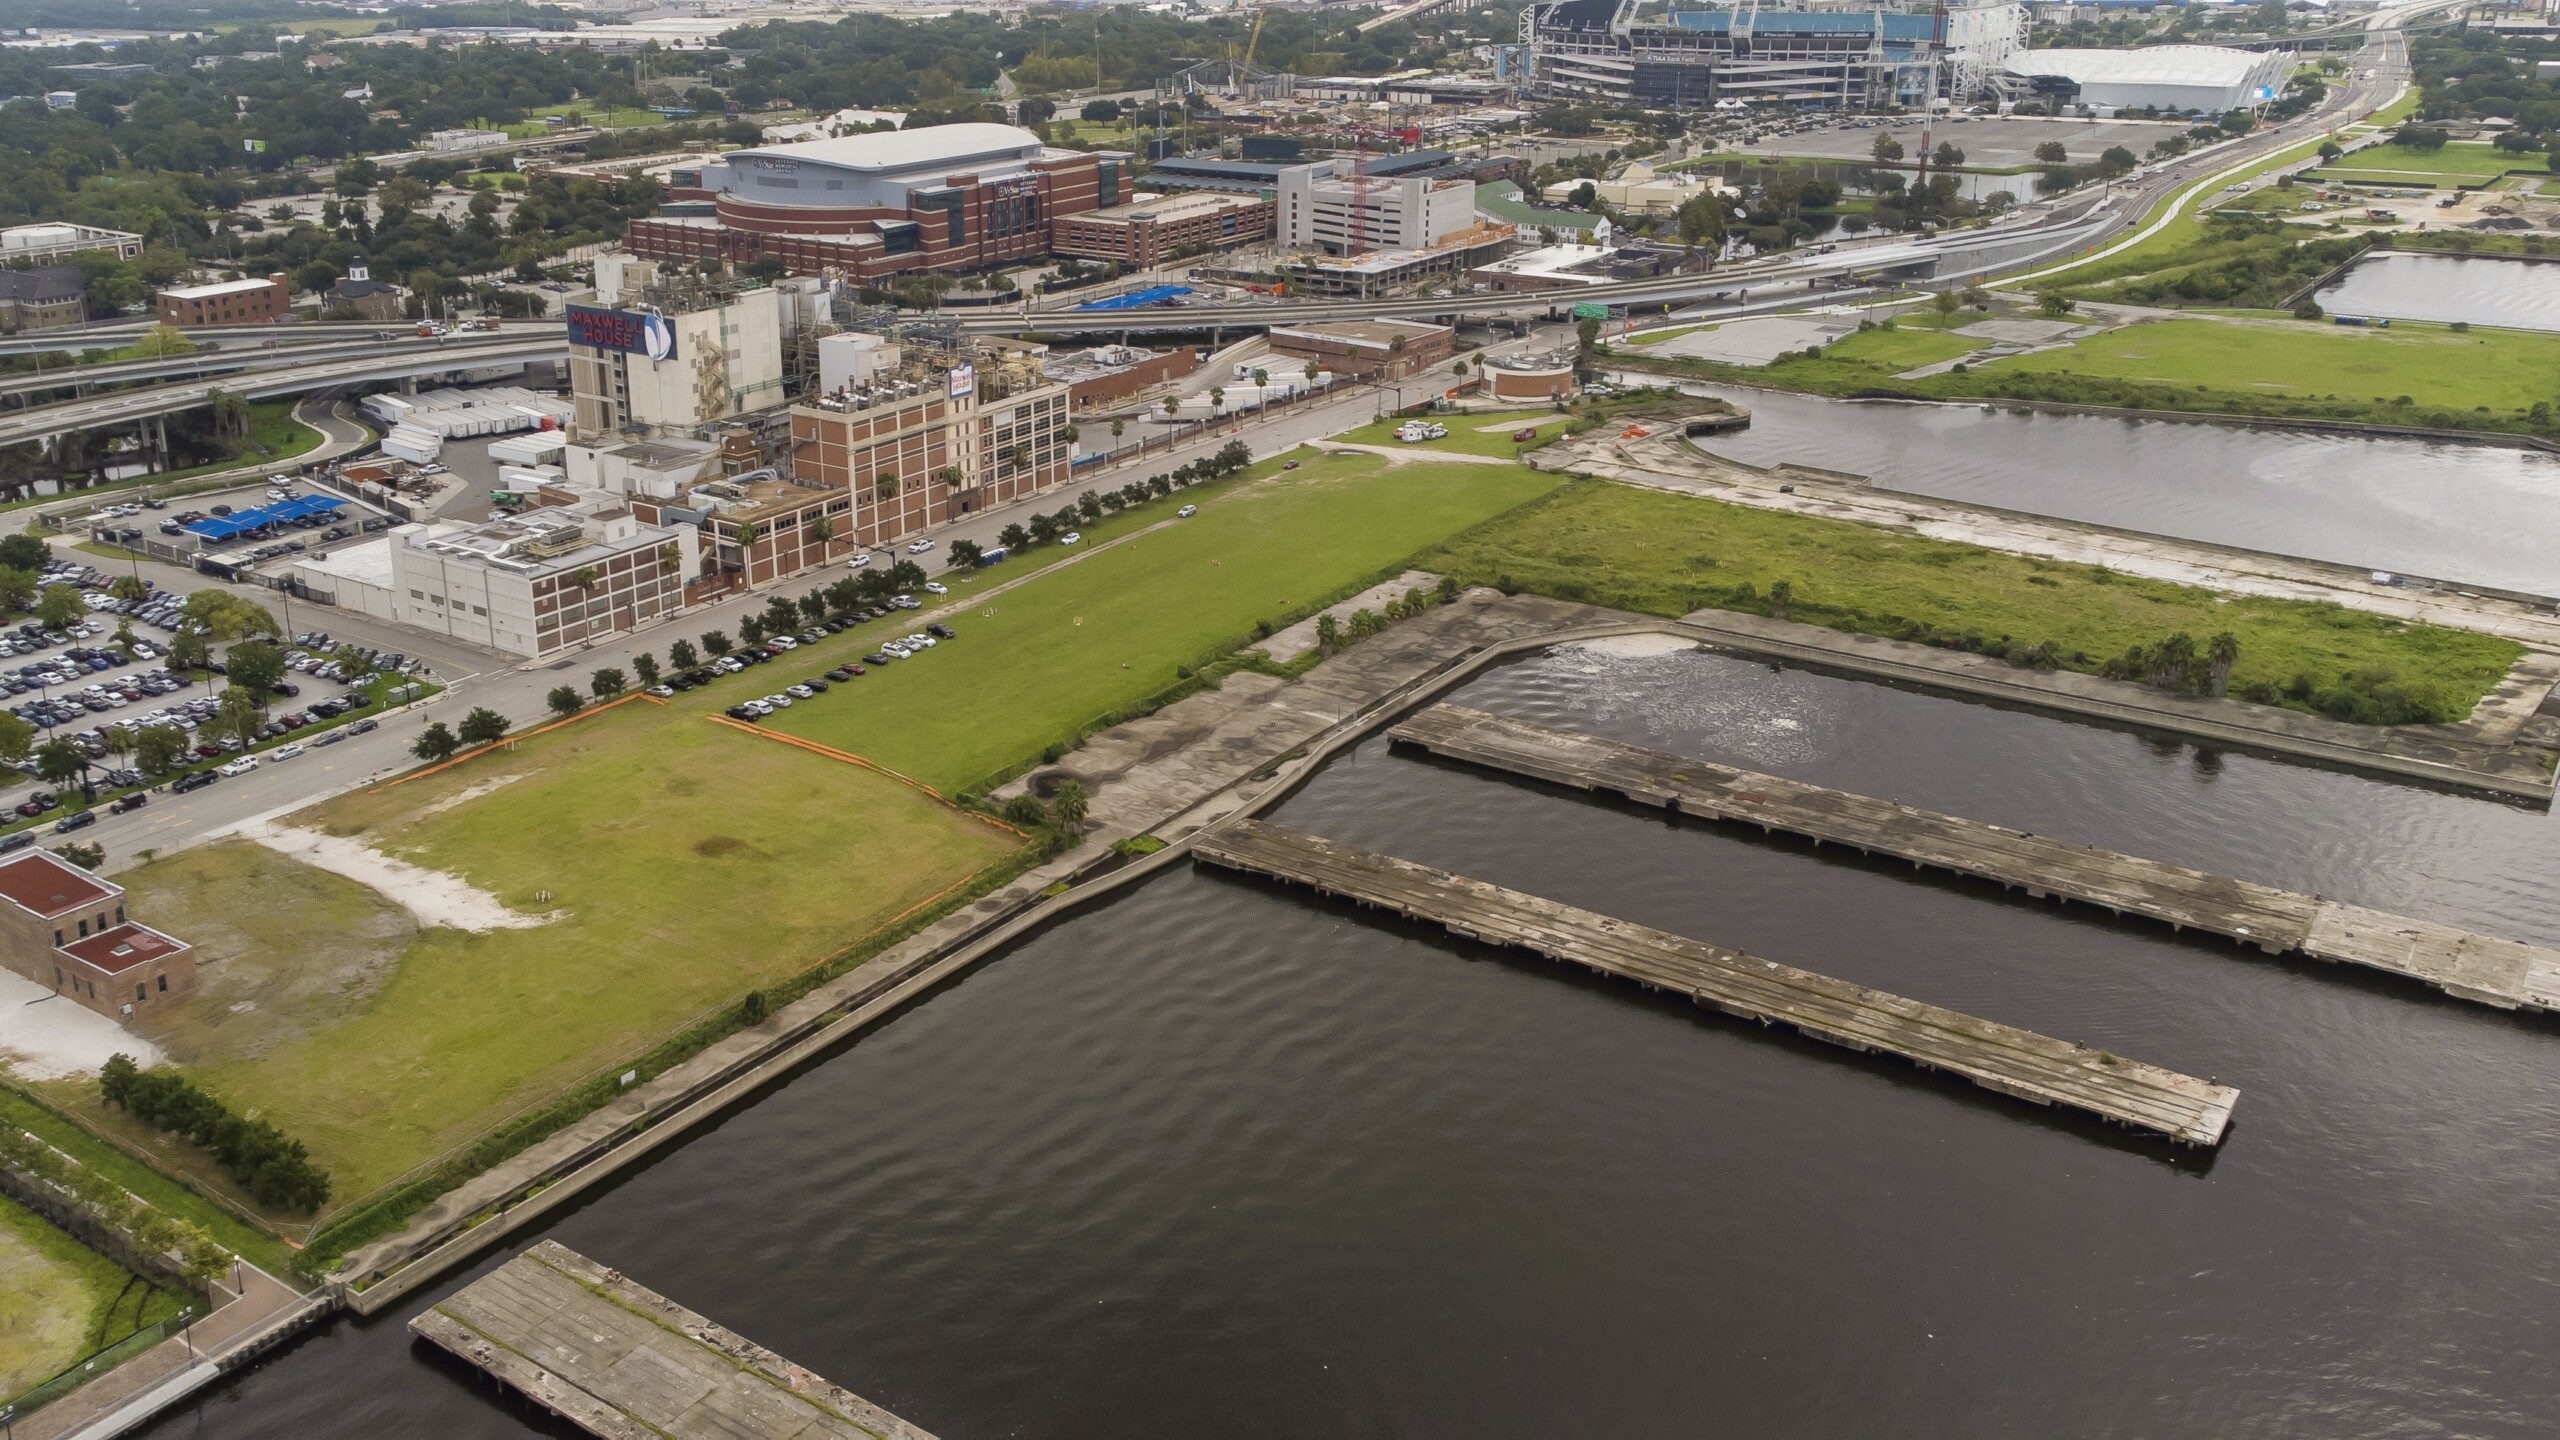 Featured image for “Jacksonville’s riverfront is starting to take shape”